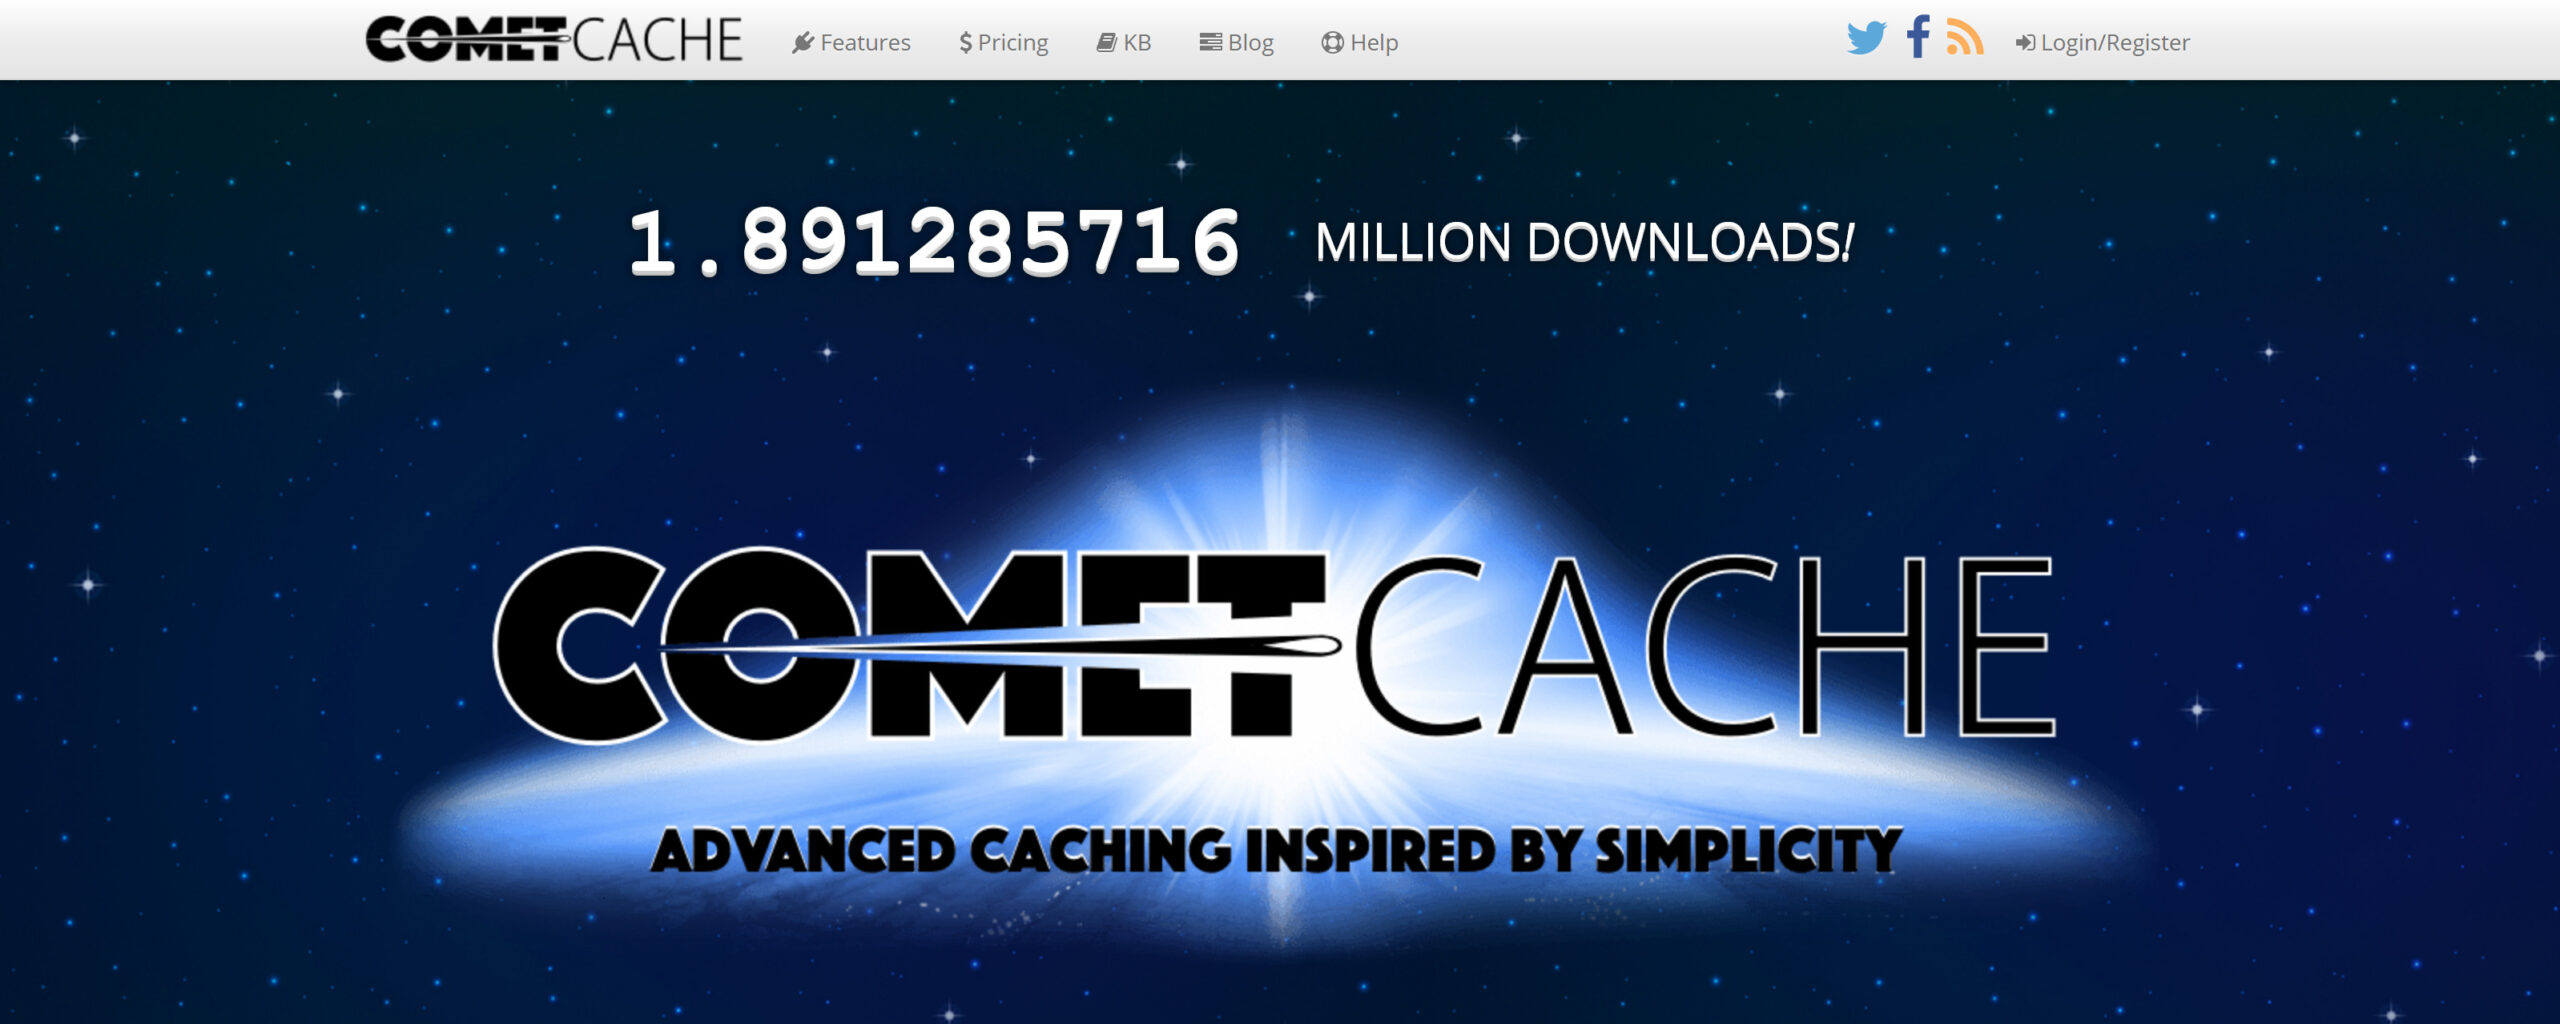 Comet Cache Pro 170220 – An advanced WordPress cache plugin inspired by simplicity